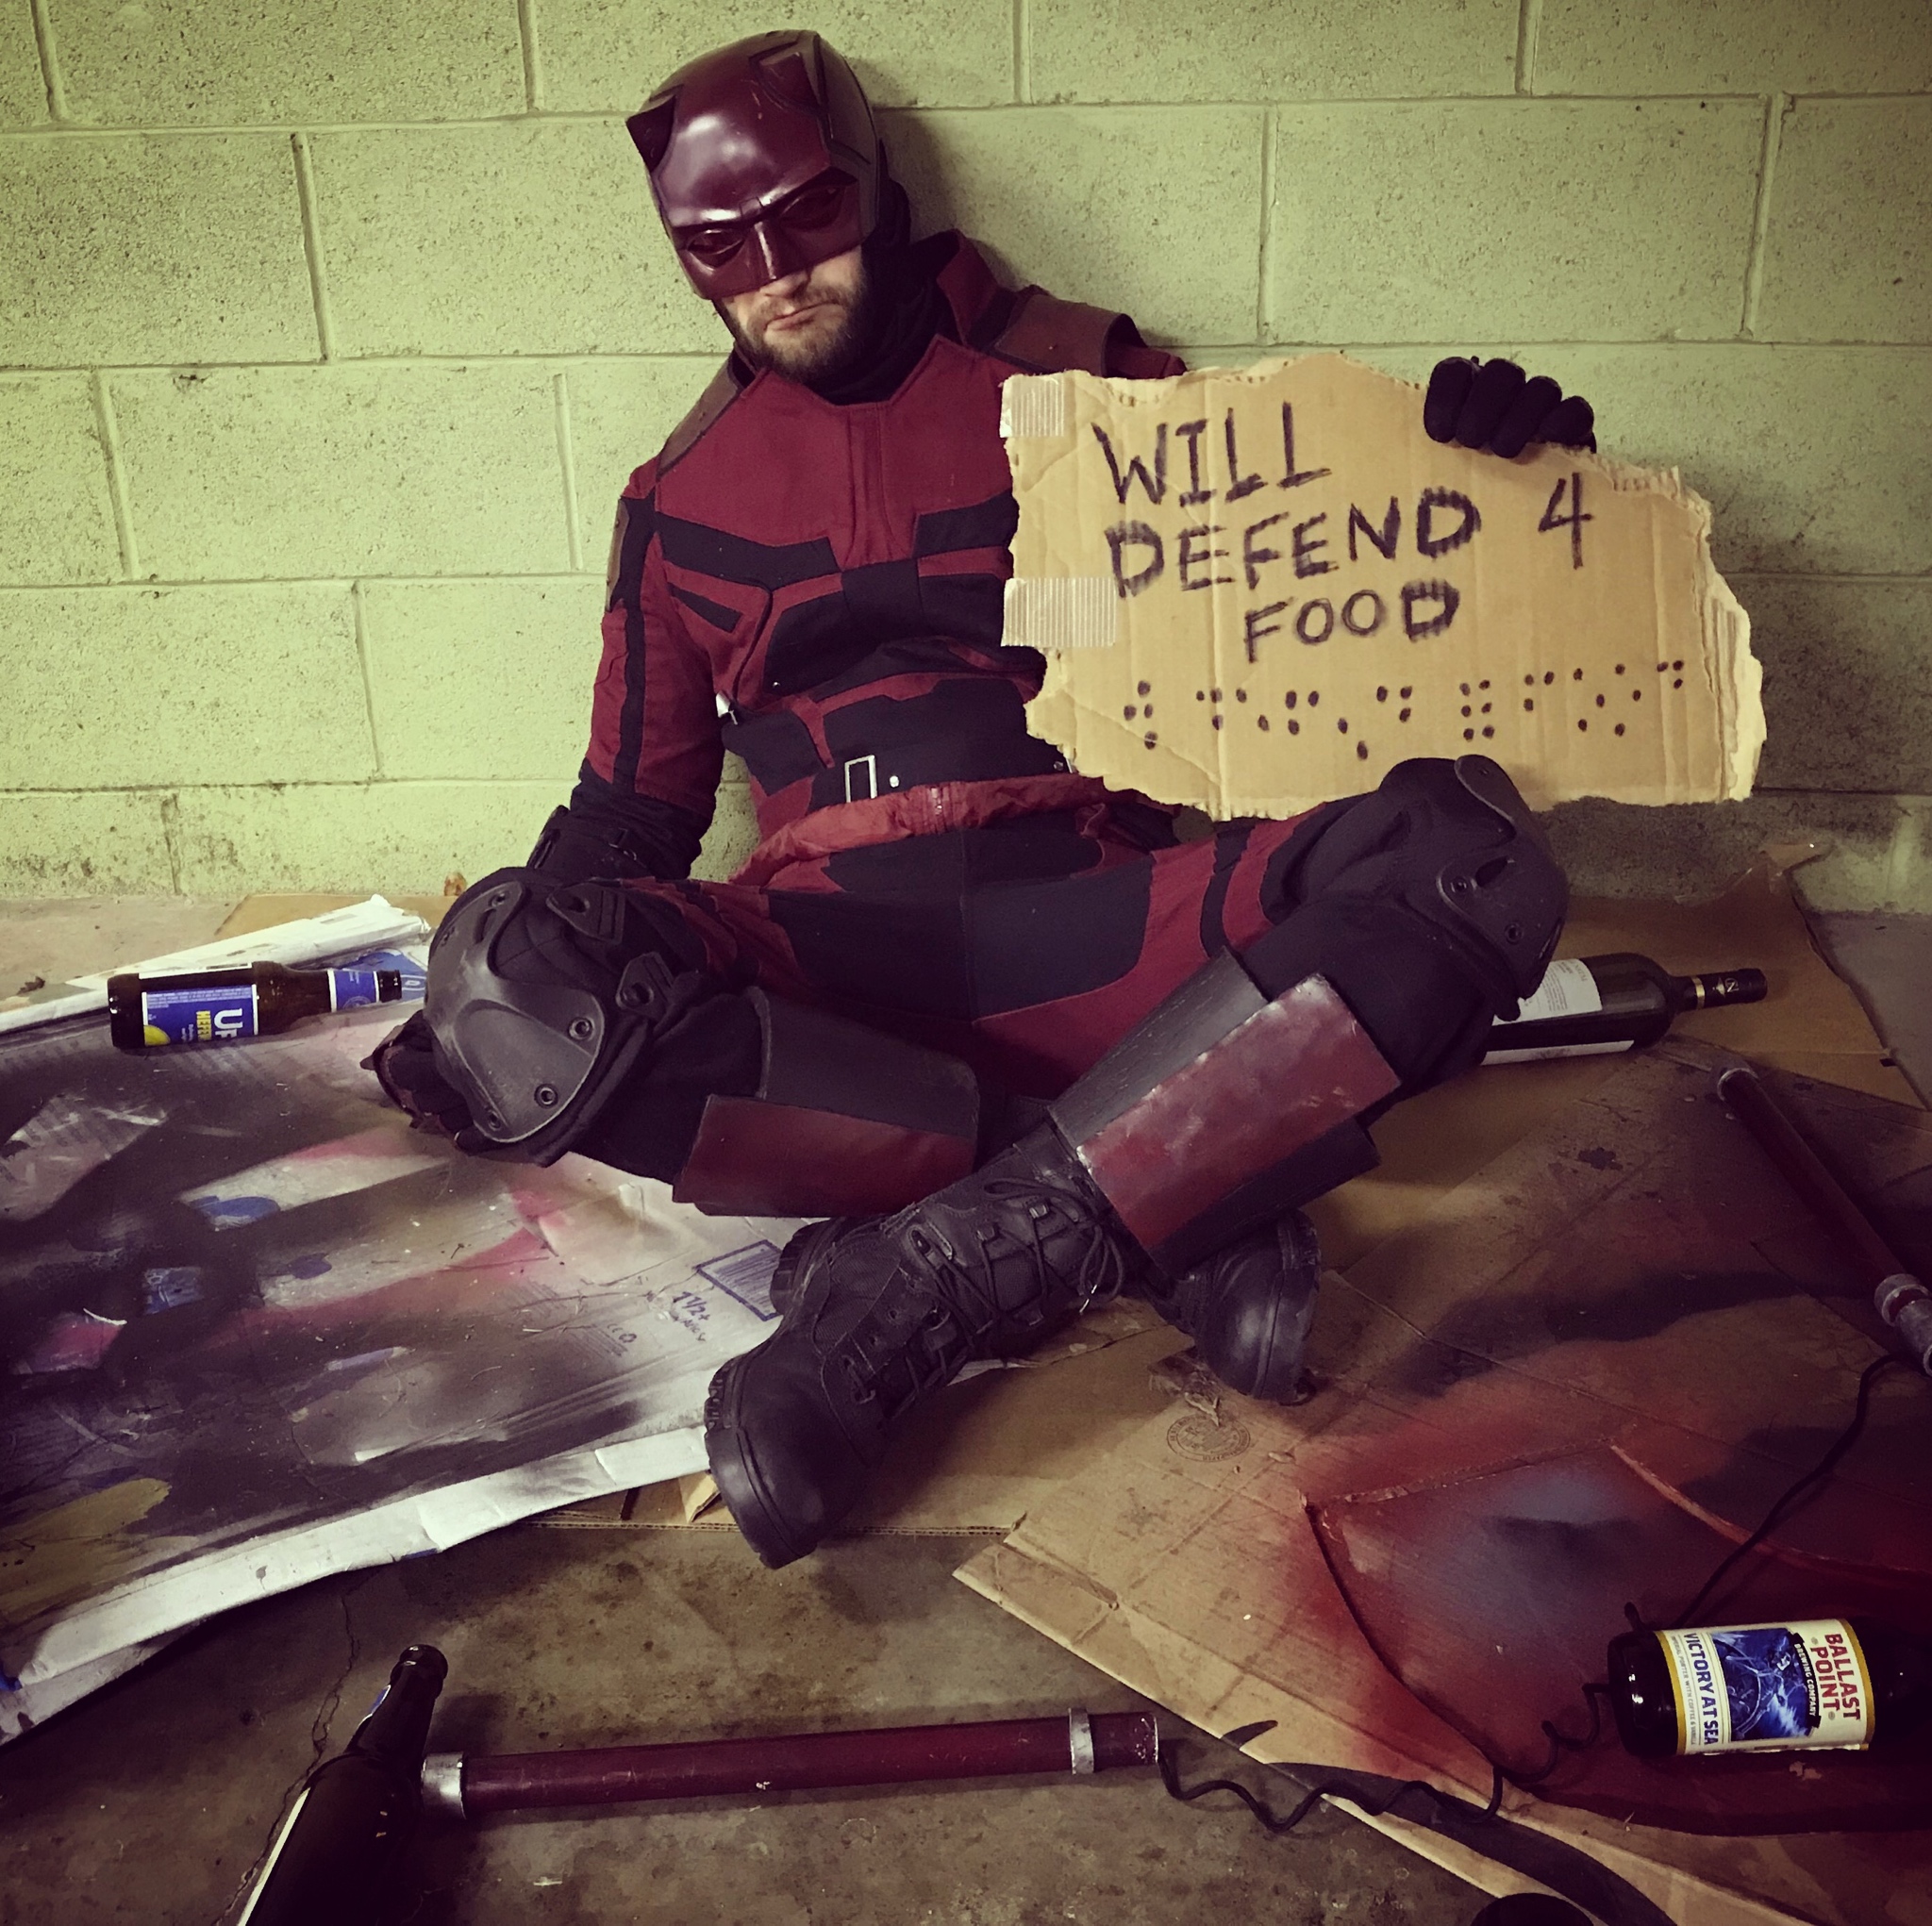 meme daredevil cancelled memes - Will Defend 4 Food